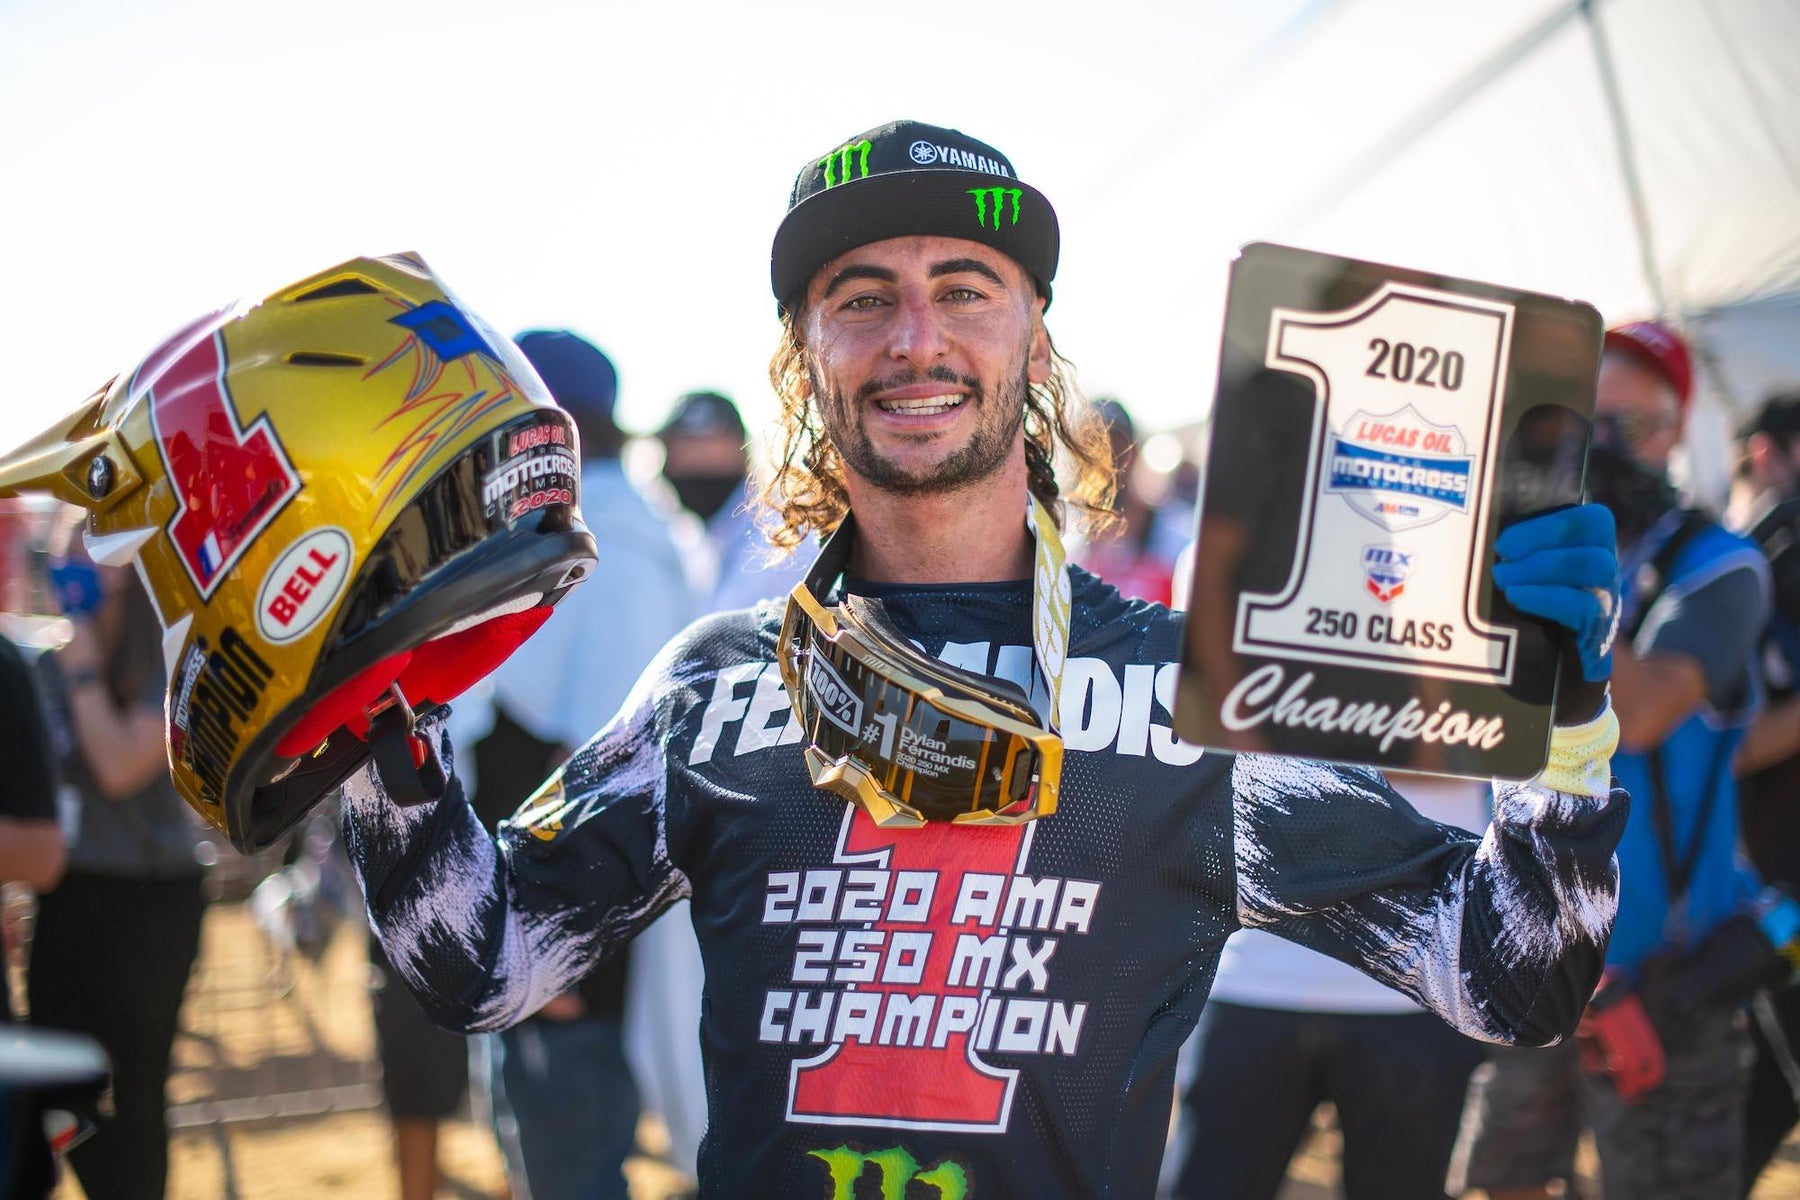 DYLAN FERRANDIS IS CROWNED AMA 250MX CHAMPION AT PALA